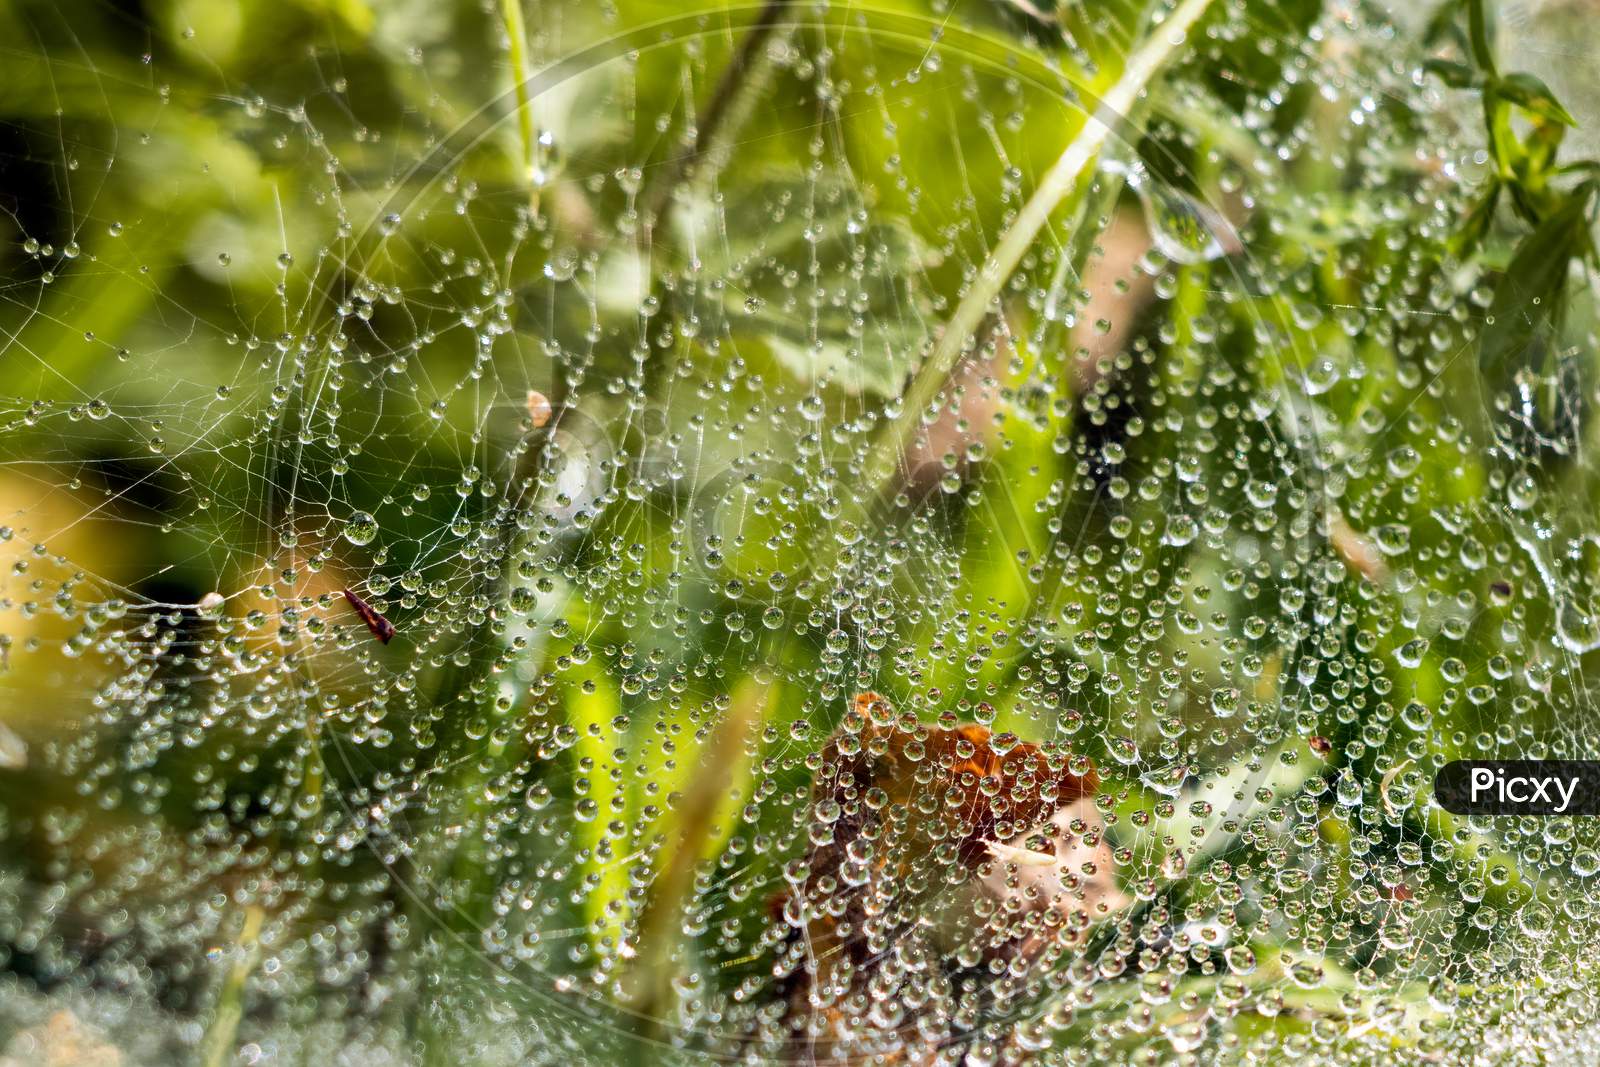 Spiders Web Glistening With Water Droplets After The Rain